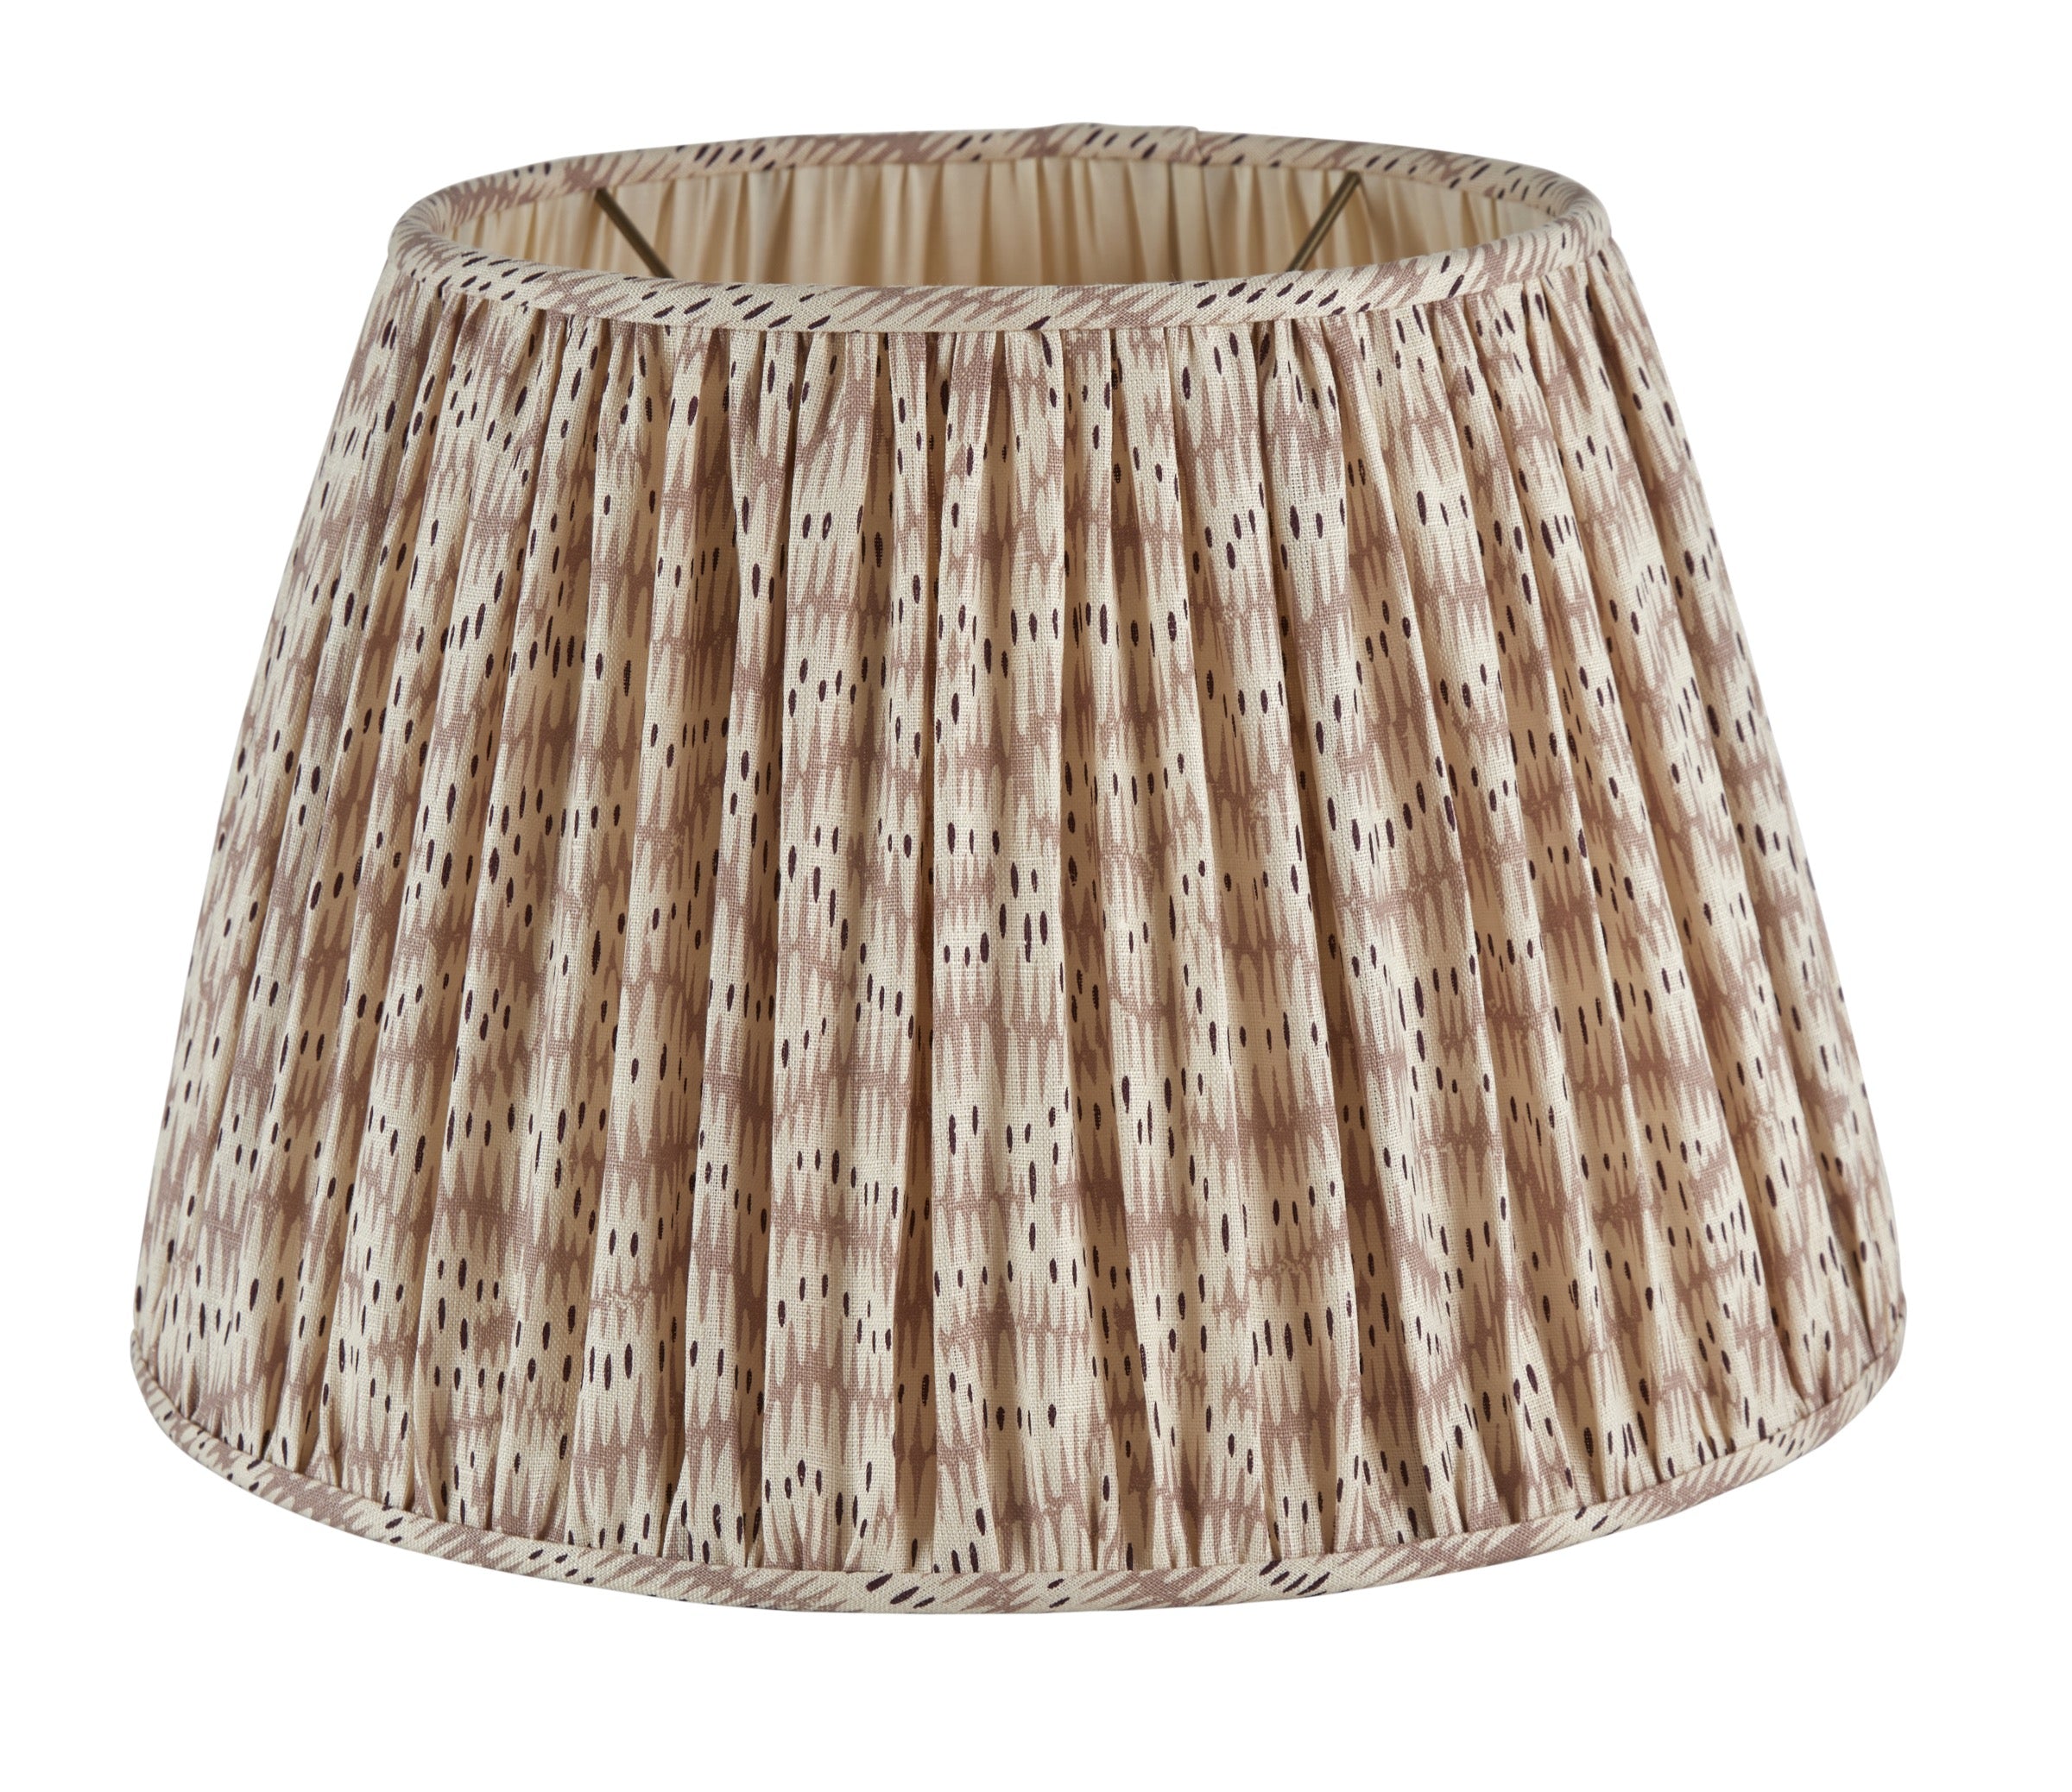 Daphne's Feathers Rose Lampshade